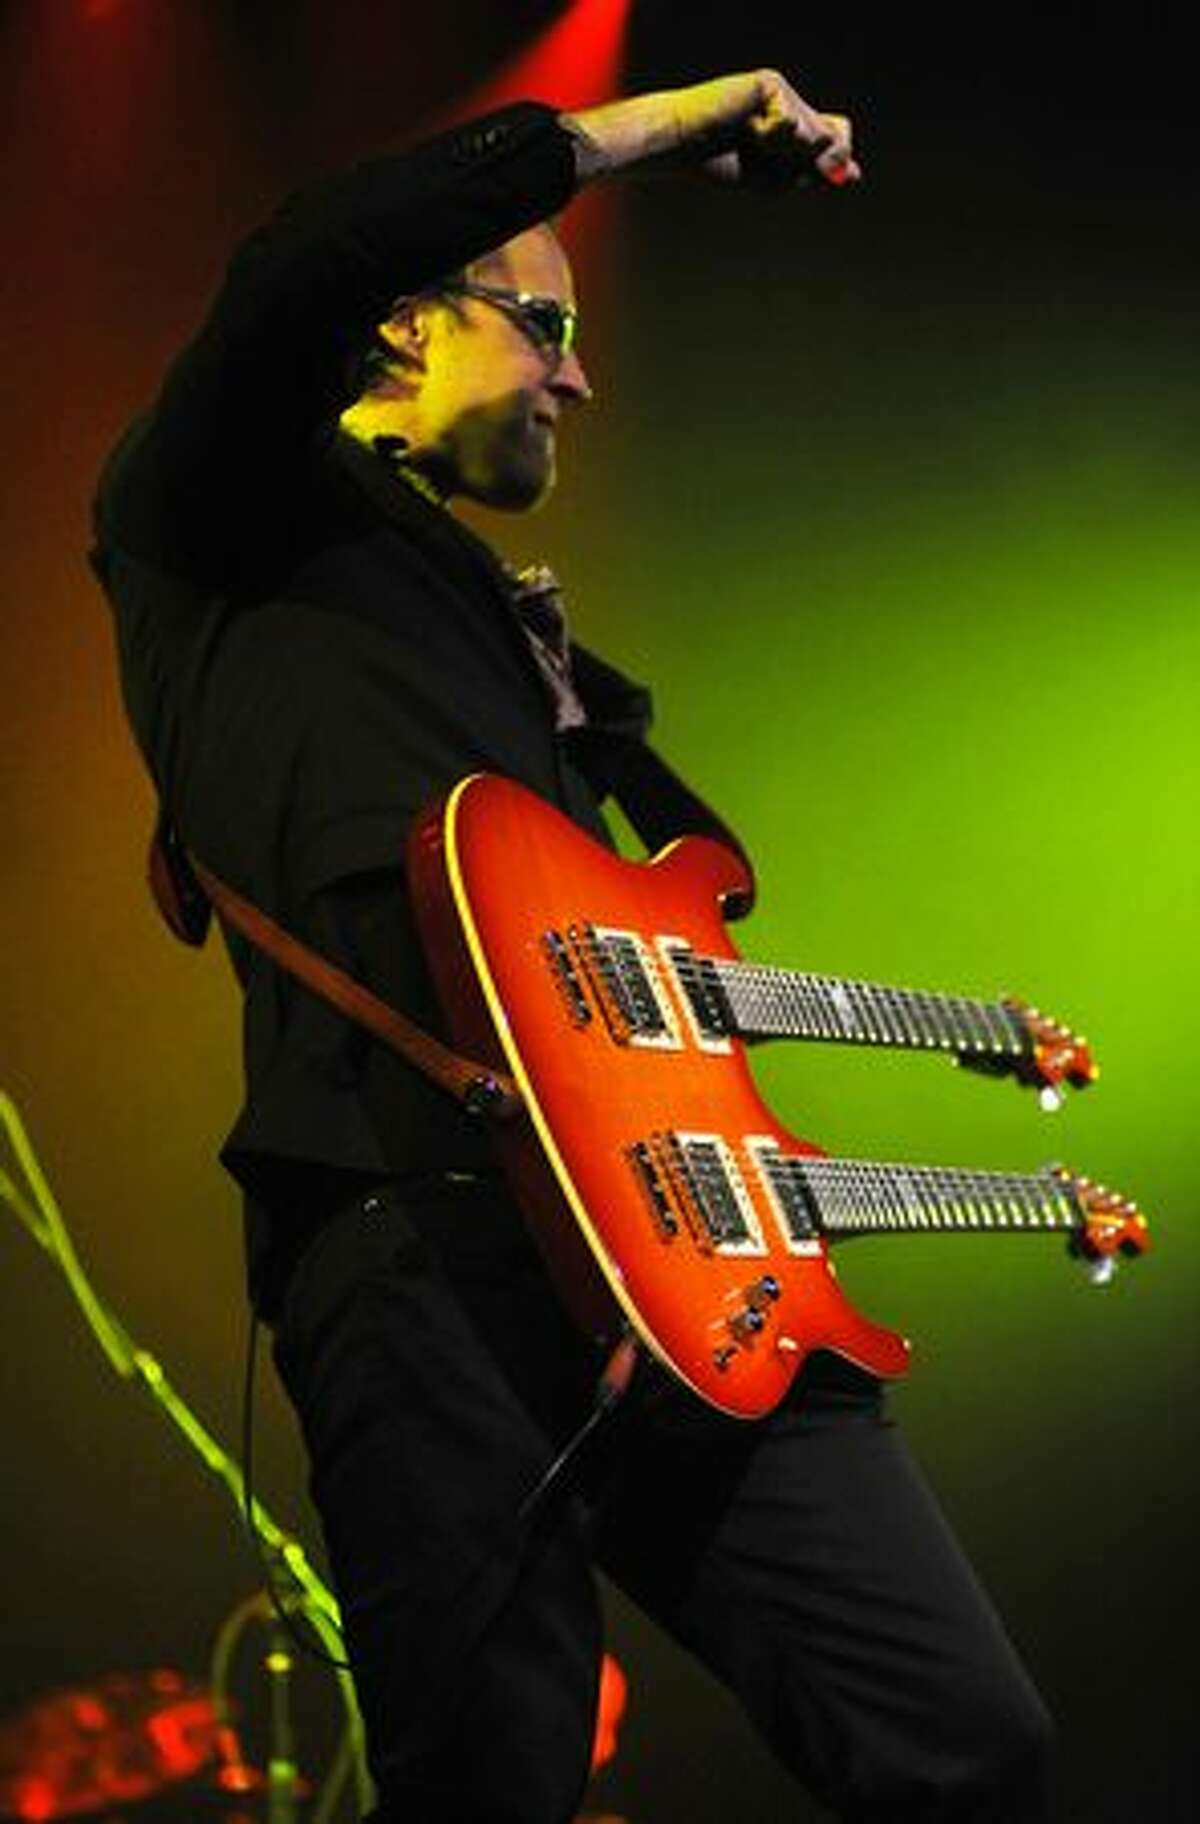 Joe Bonamassa performs at The Moore Theater in Seattle on March 5, 2010.